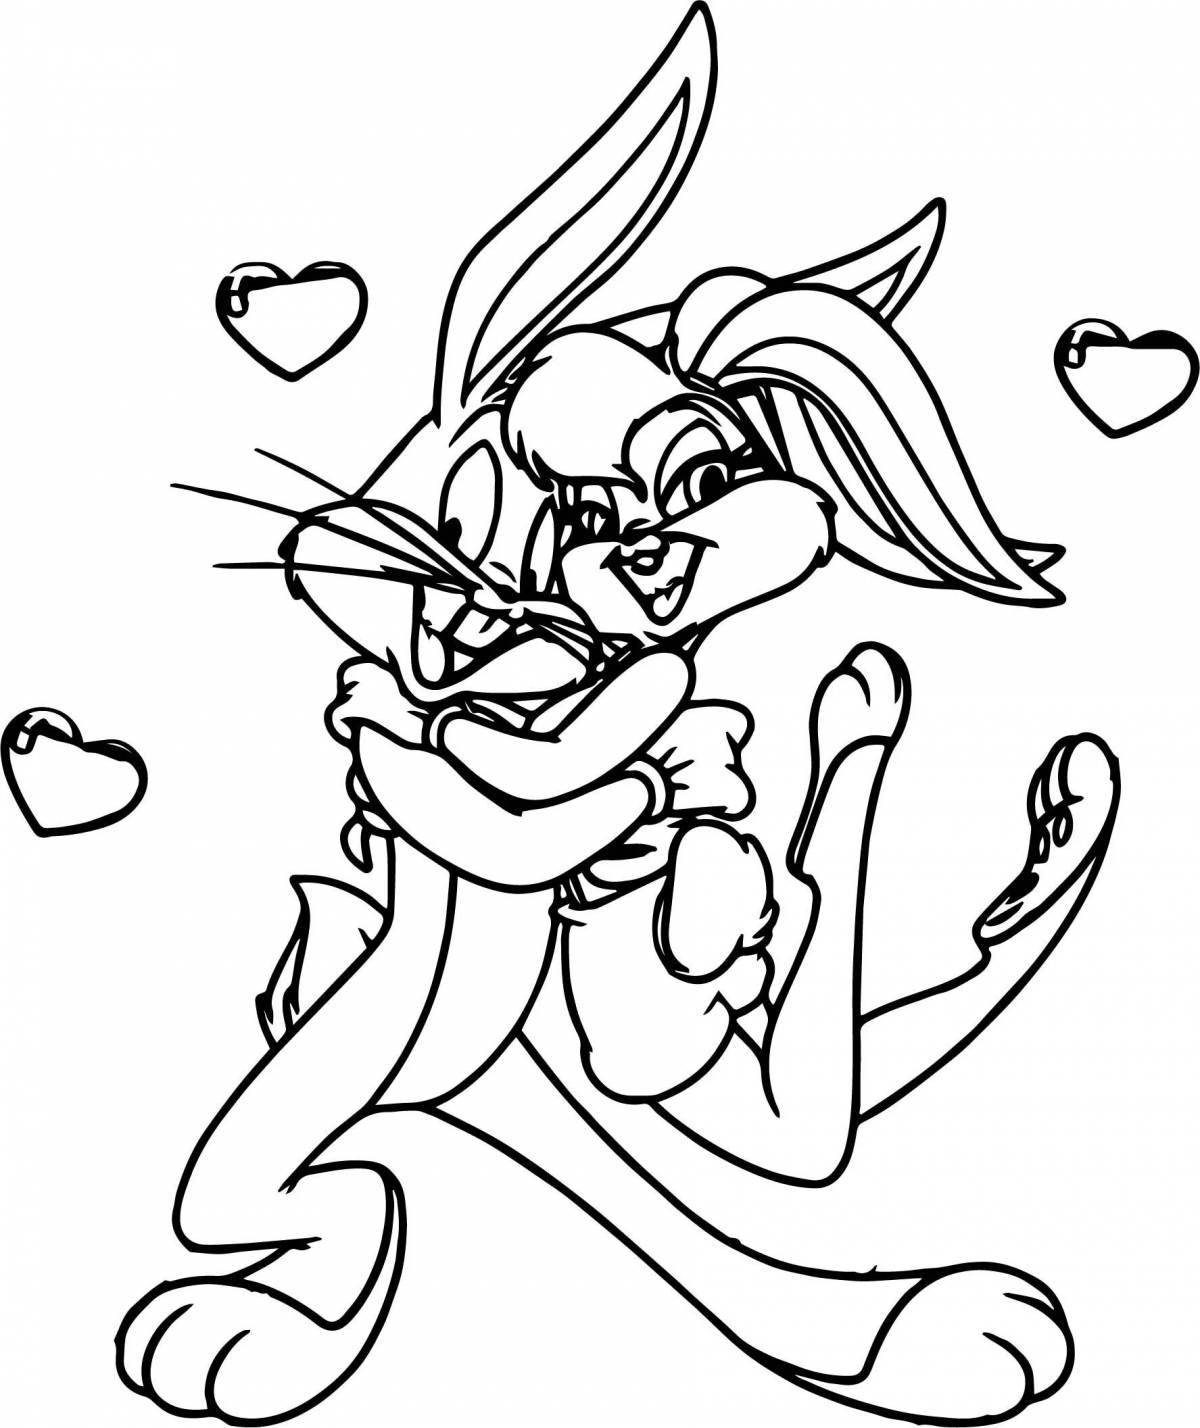 Coloring page energetic bugs bunny